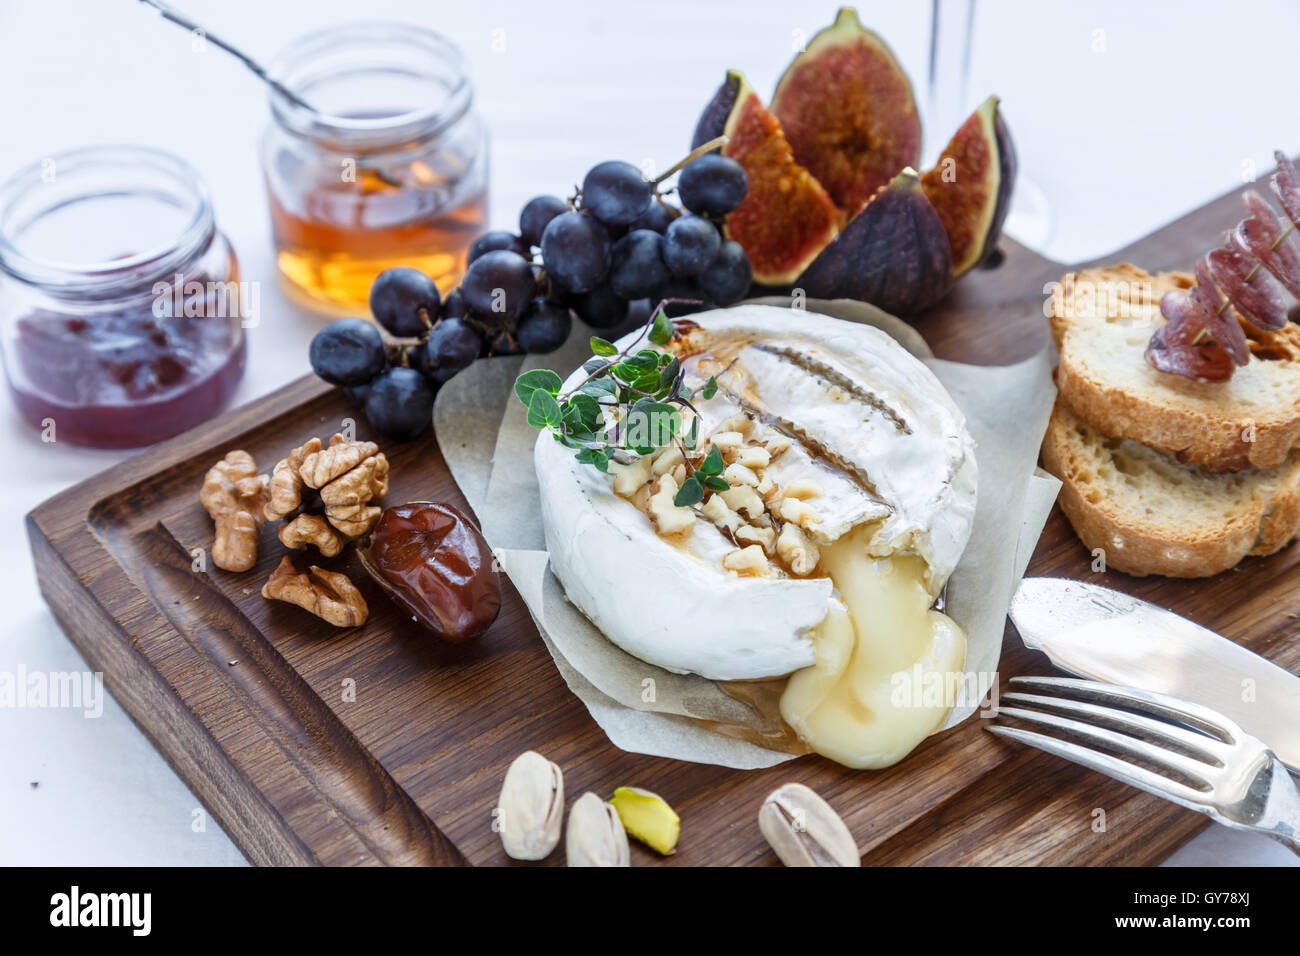 Baked camembert cheese with figs, honey, grapes and nuts. Top view Stock Photo